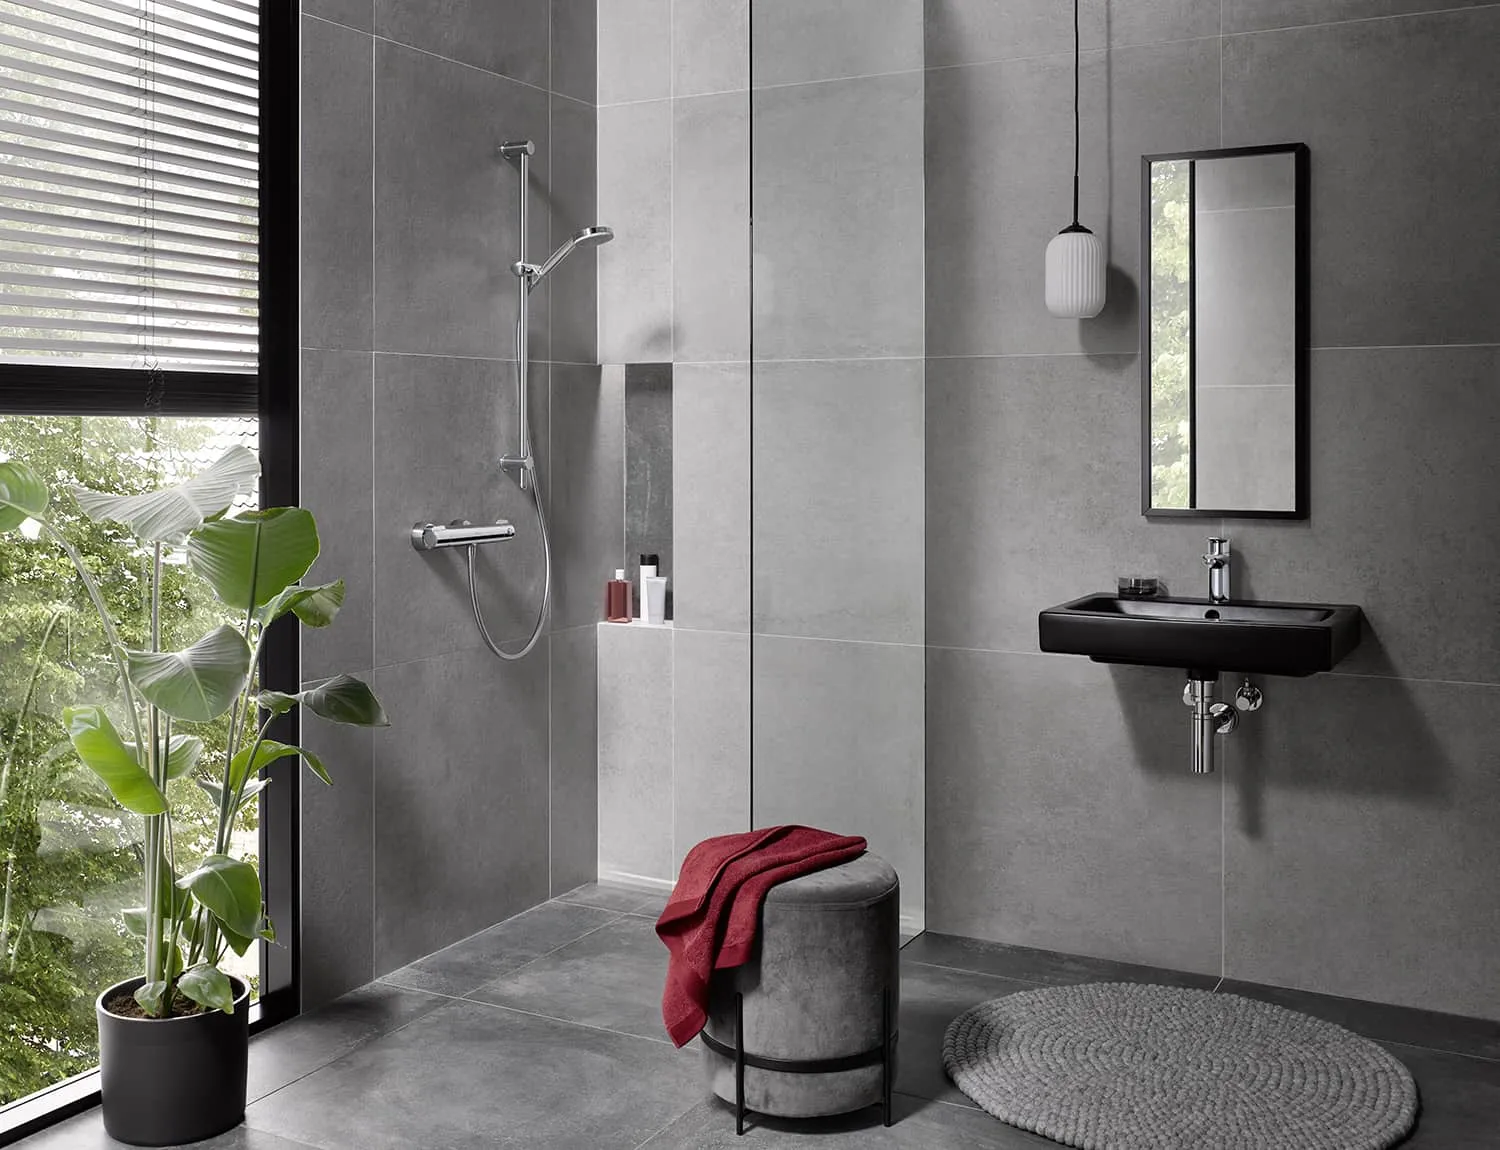 Schell Modus shower thermostat in a grey themed bathroom for temperature control